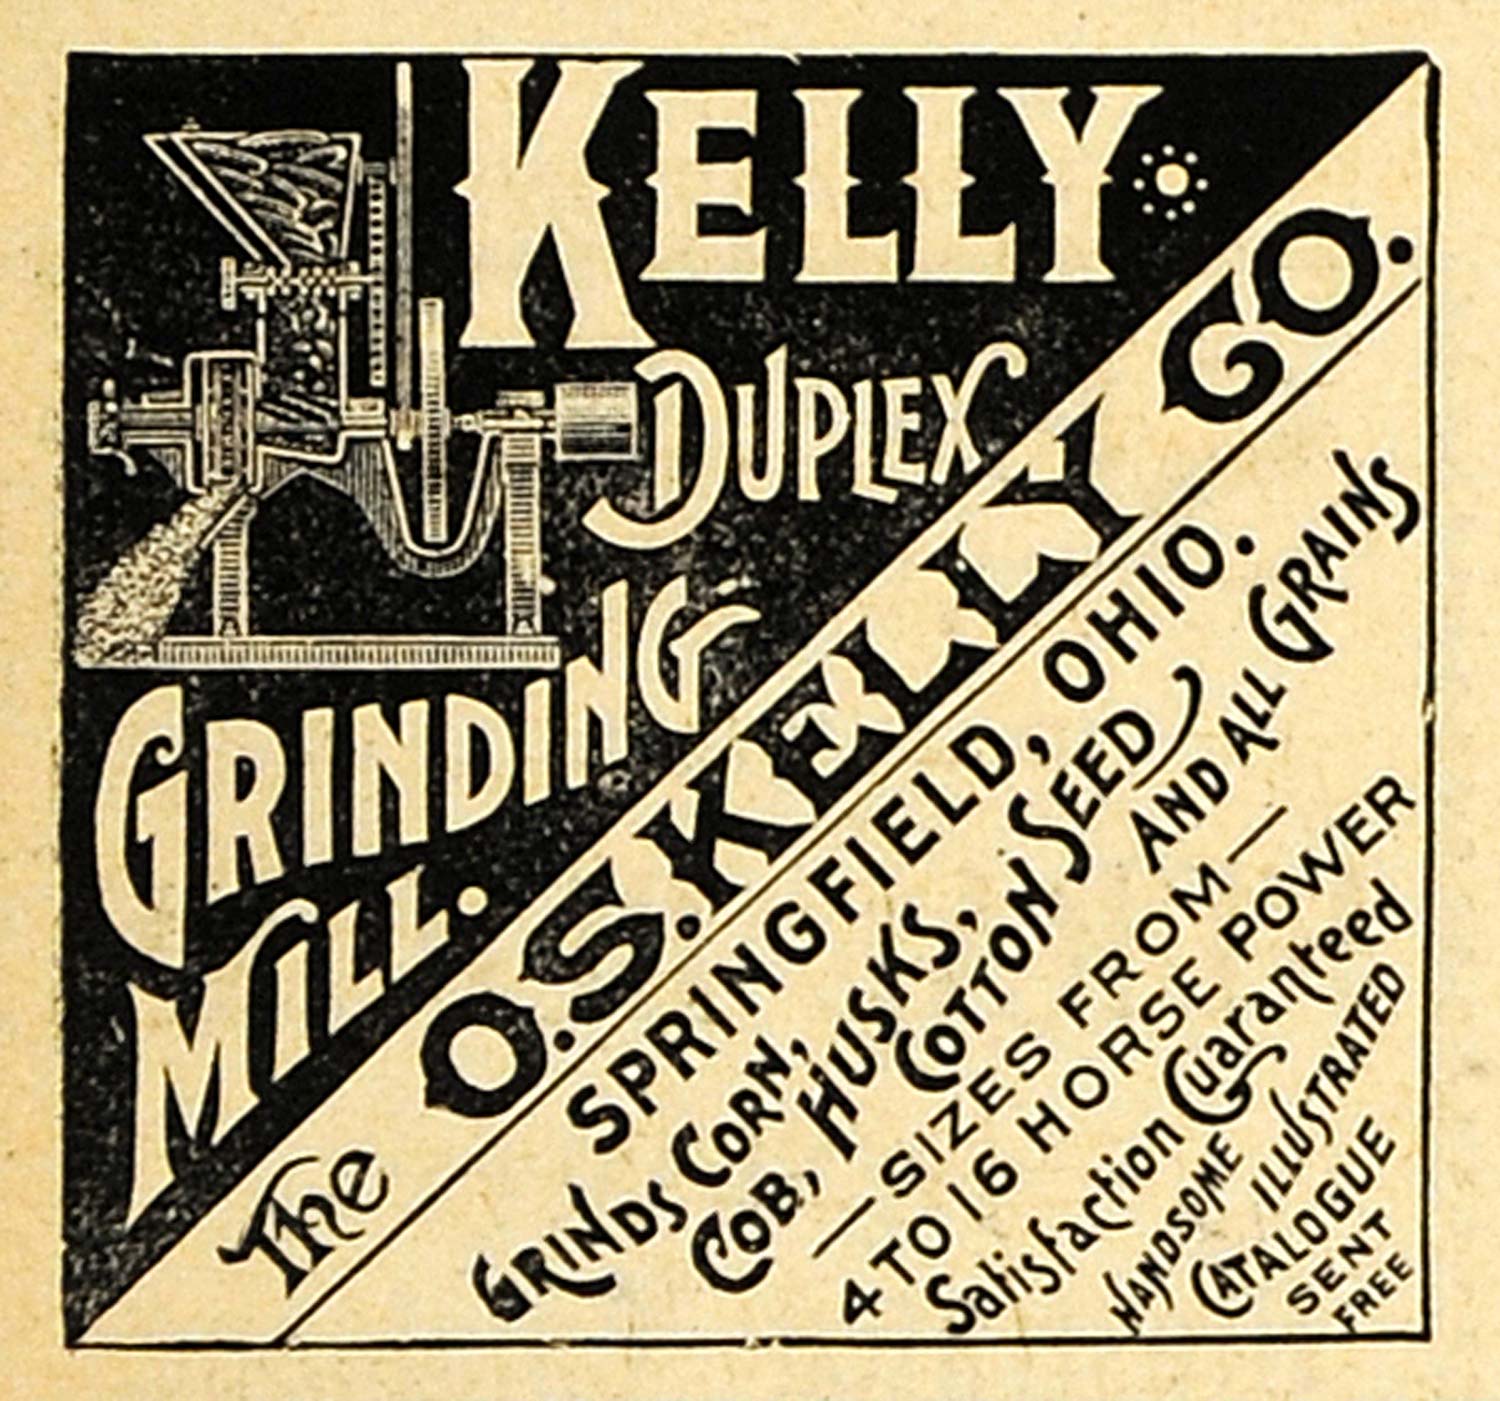 1892 Ad O. S. Kelly Duplex Grinding Corn Cotton Mill Agricultural Machinery AAG1